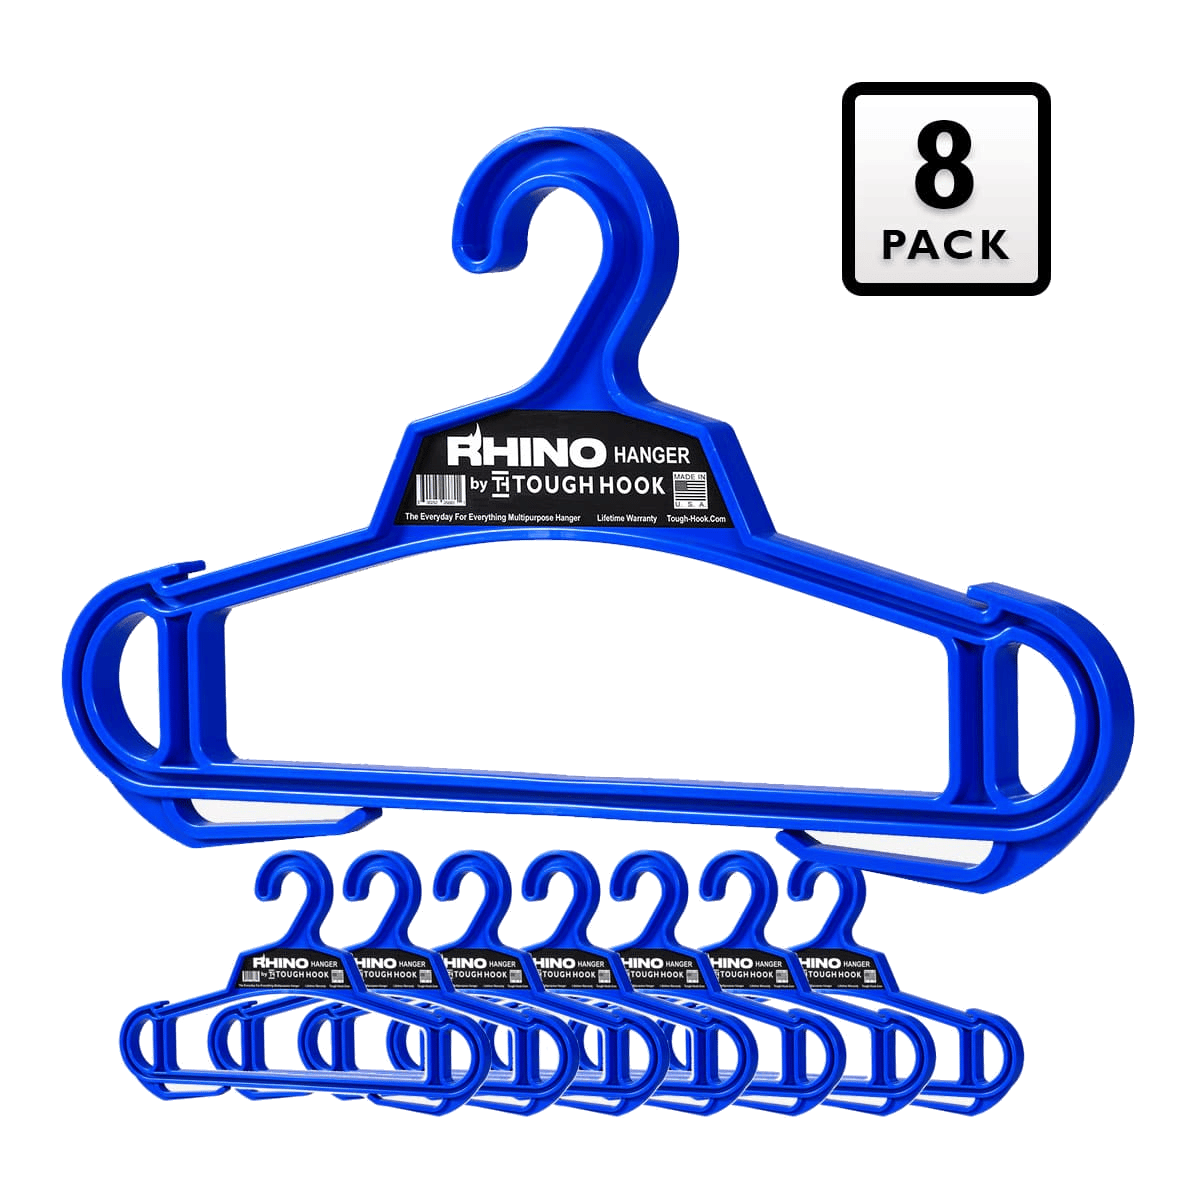 https://tough-hook.com/wp-content/uploads/2022/01/TH-Product-IMG-780x780-rhino-8-pk-sign2-1.png